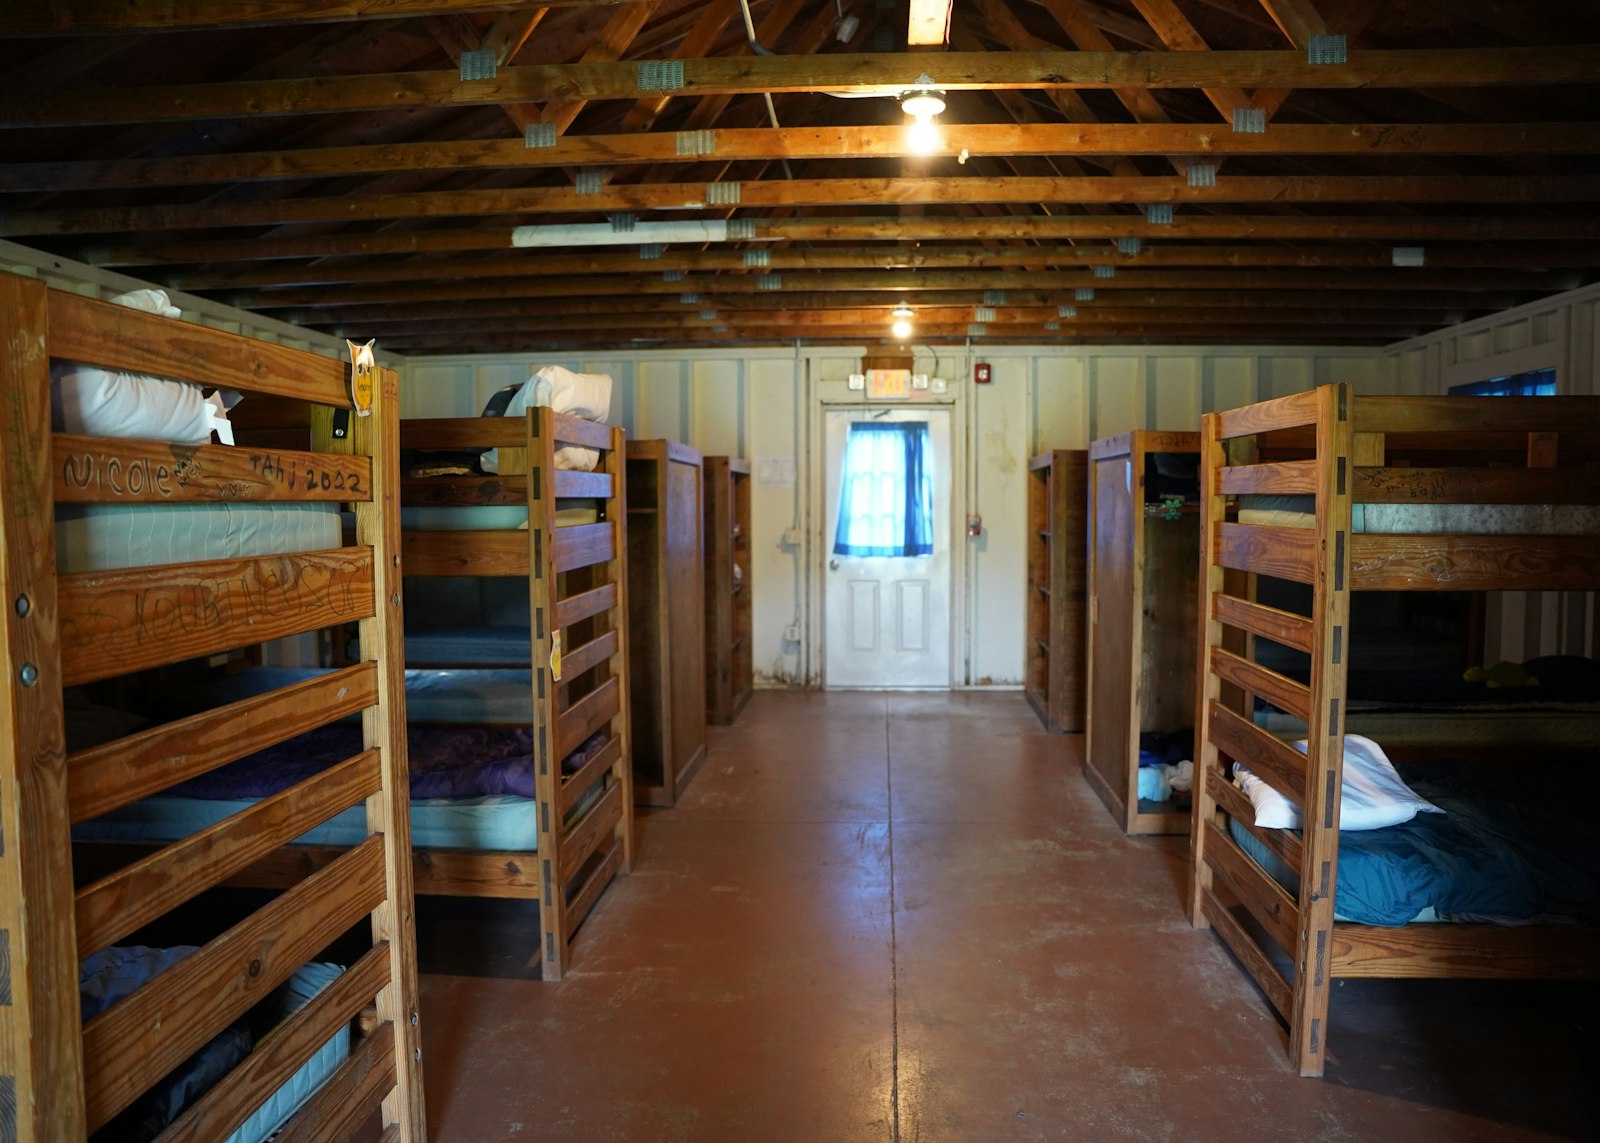 One of the cabins at Camp Ozanam, which was founded in 1923 by the Society of St. Vincent de Paul. Originally a boys camp, the society later opened a nearby girls camp, Camp Stapleton, in 1940. The camps merged in 2004, and Camp Ozanam is now co-ed.